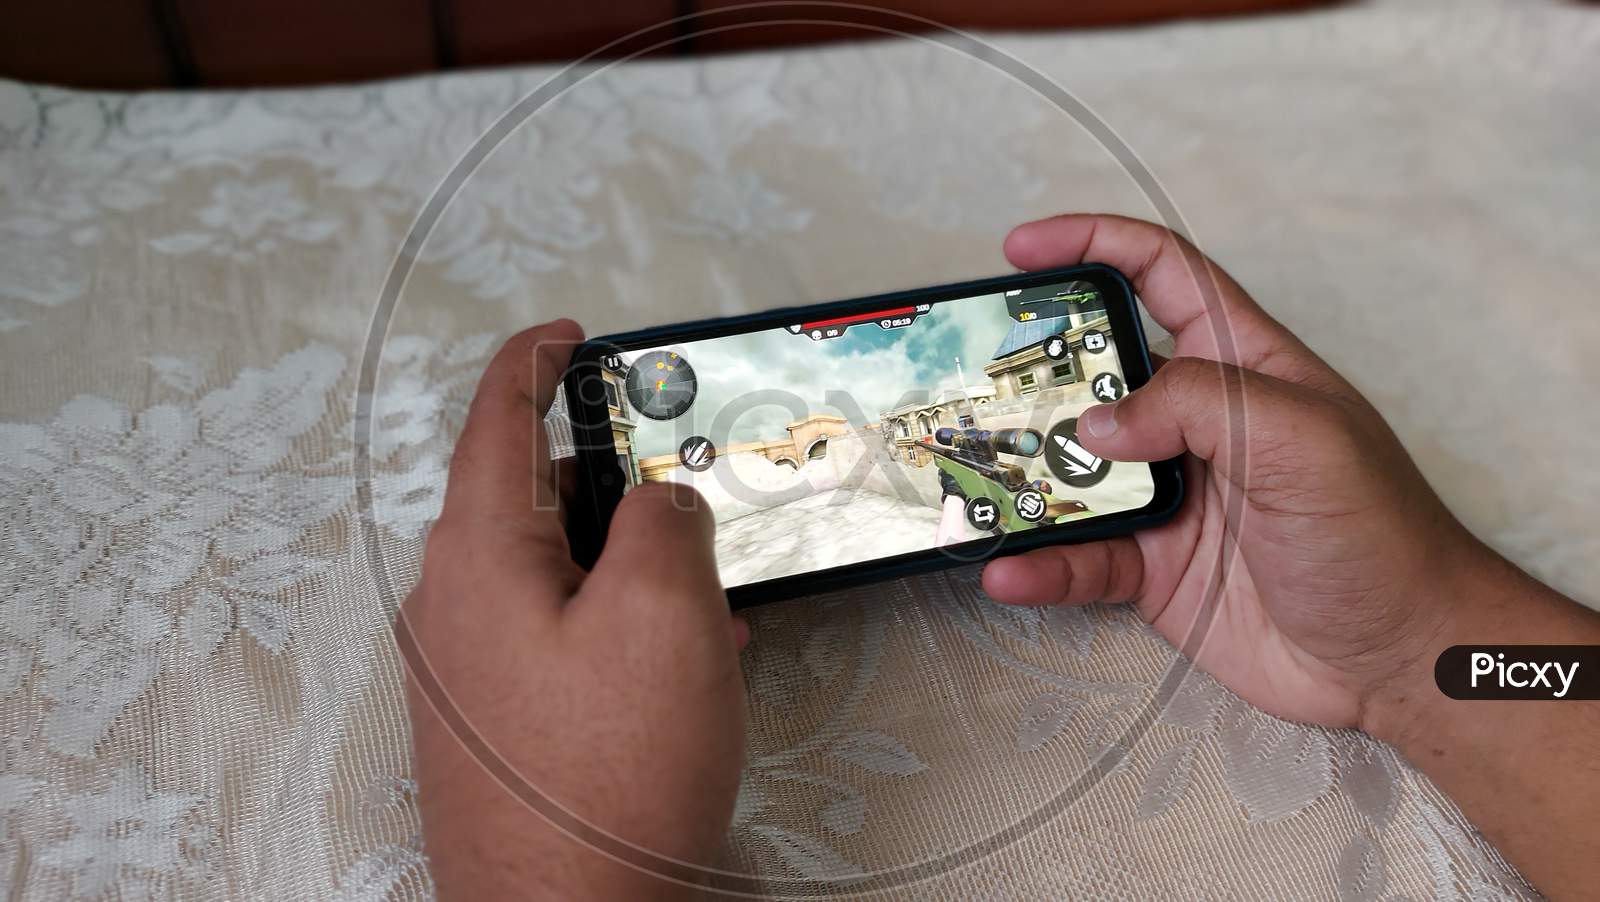 mobile video game